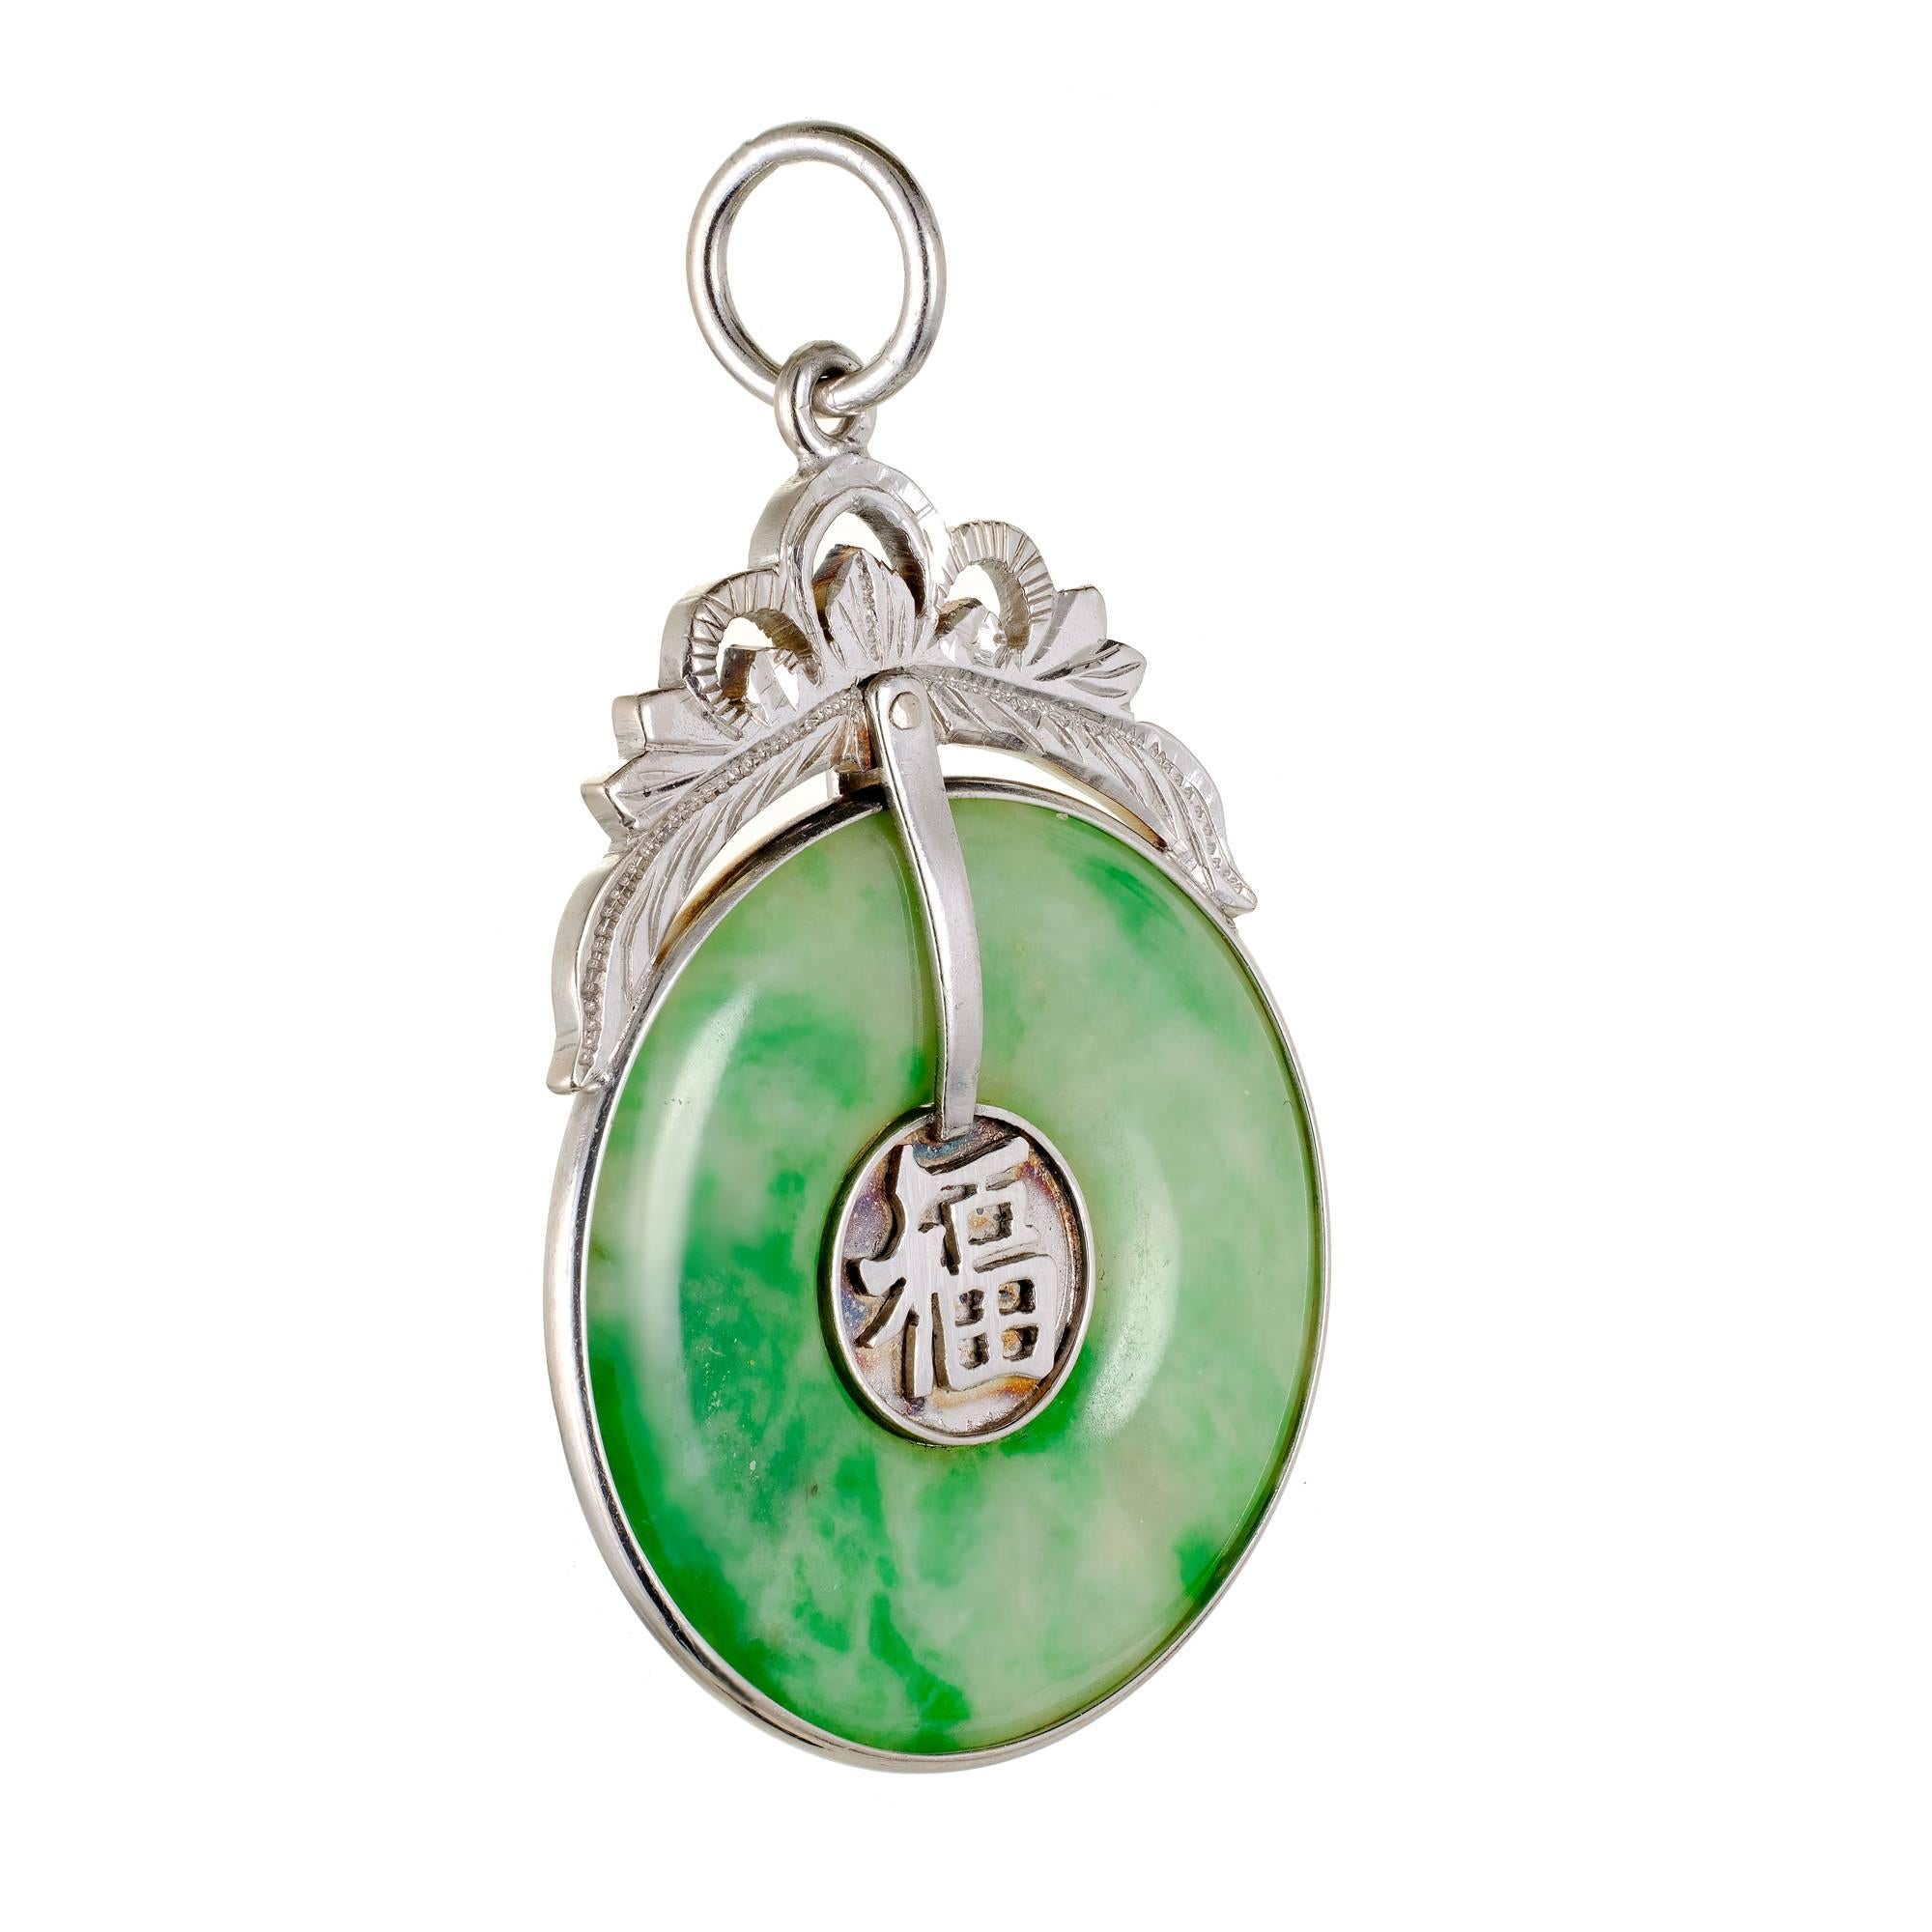 Round natural bright mottled green Jadeite Jade Hololith pendant with a 14k white gold frame and top. Hand engraved and GIA certified.

1 Hololith mottled green Jadeite Jade, 25.77 x 25.73 x 2.73mm, GIA certificate #2181636976
14k white gold
Top to